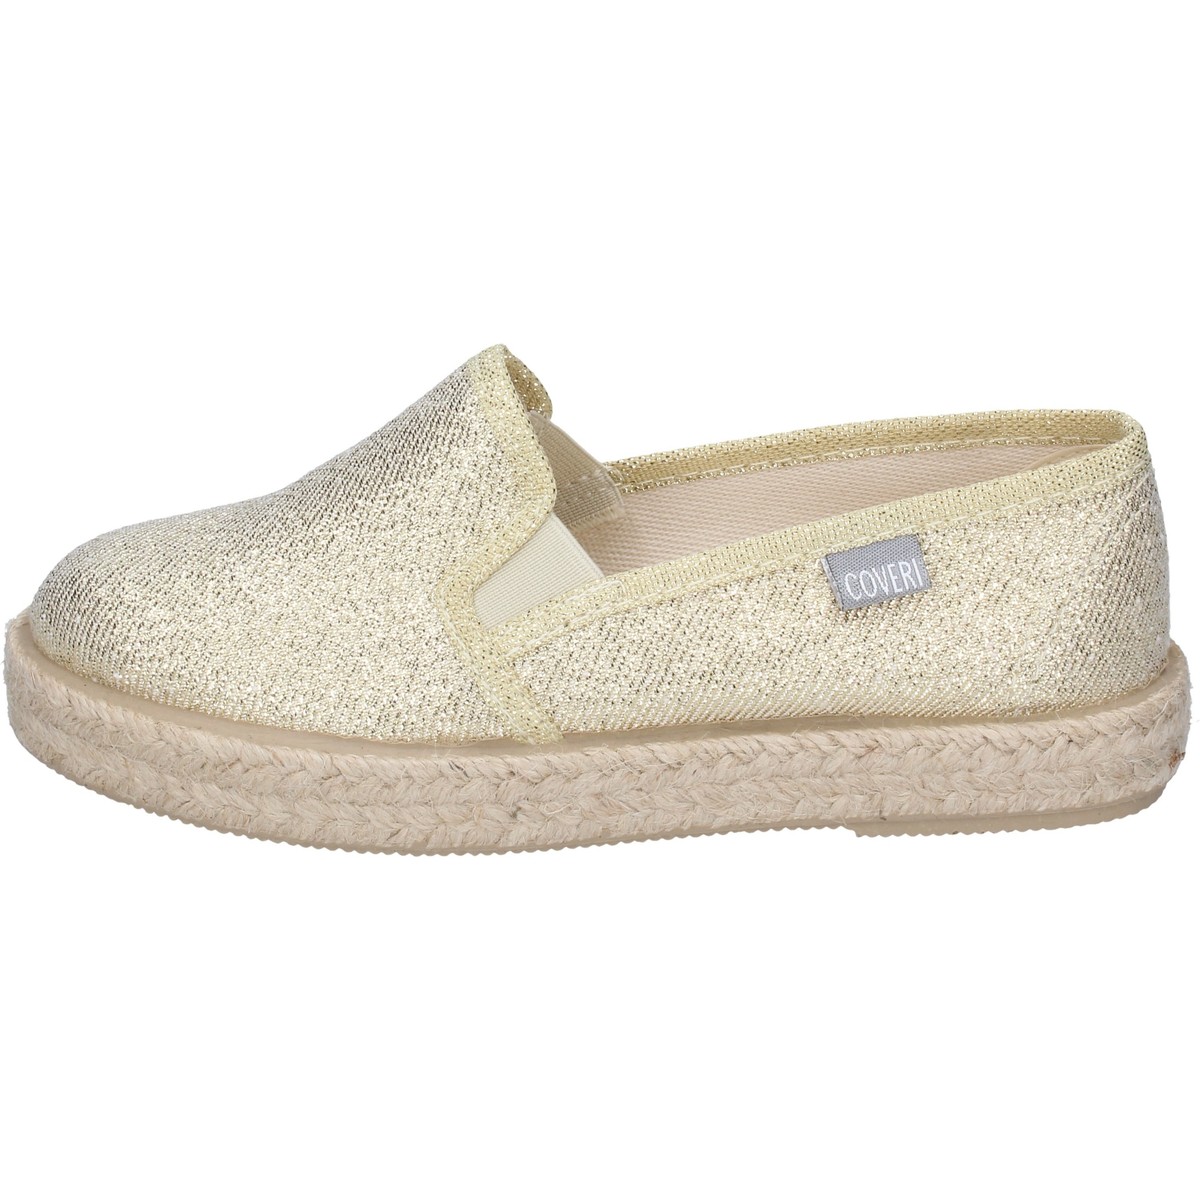 Shoes Girl Trainers Enrico Coveri BN700 Gold